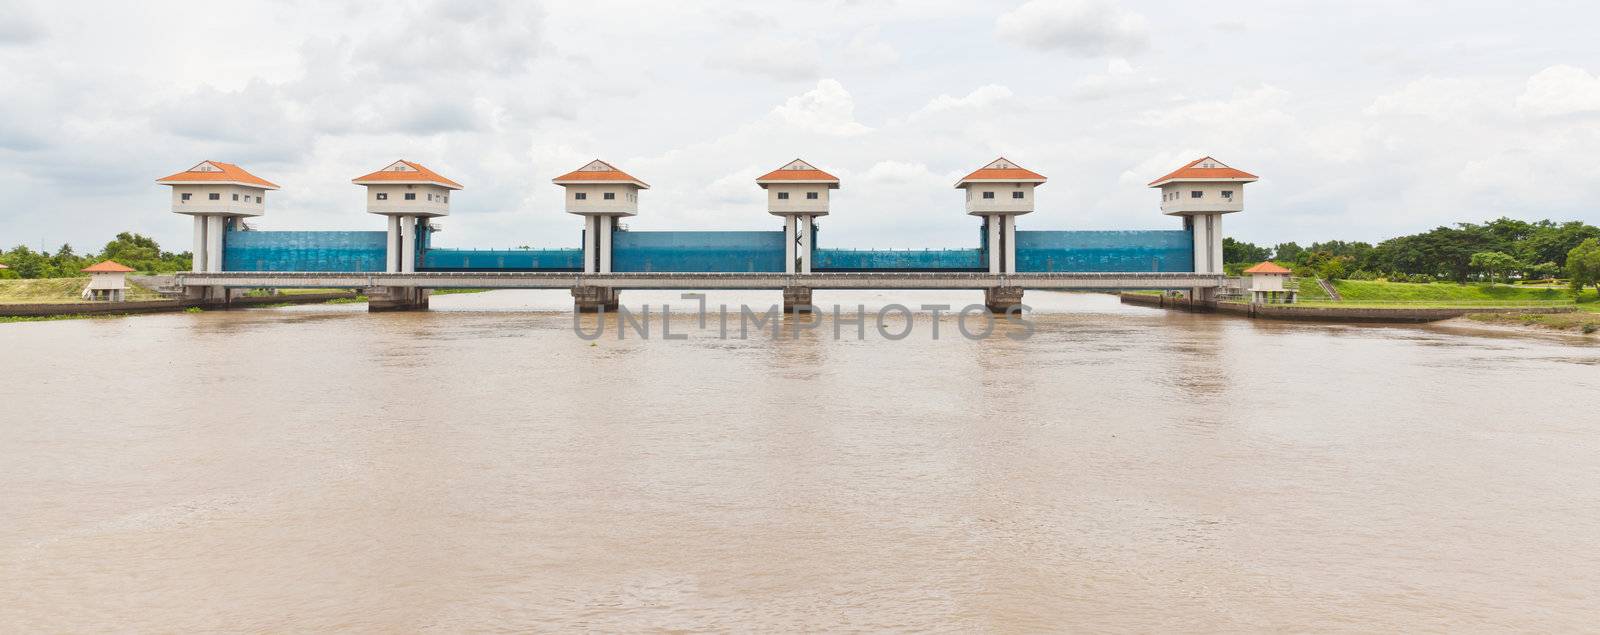 The water gate of BangPaKong River in Thailand by FrameAngel